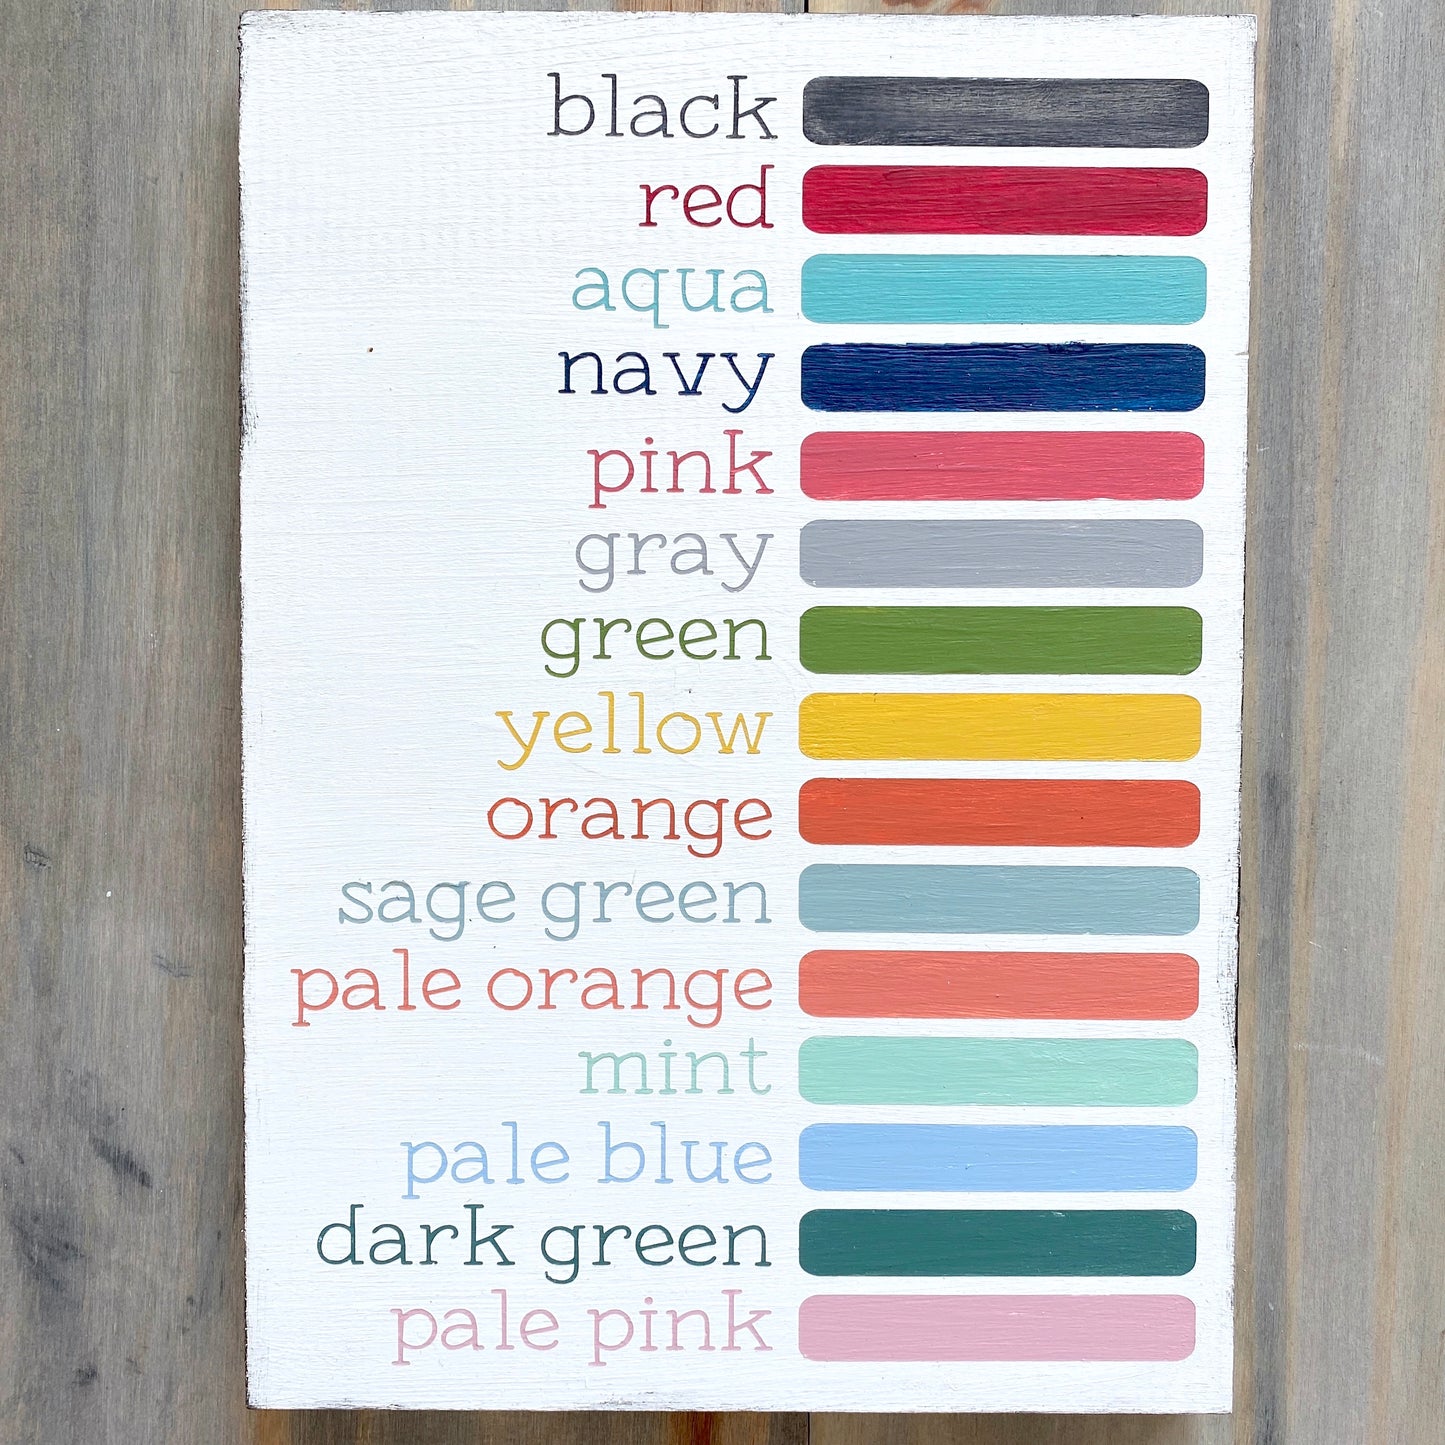 Anchored Soul color Display Photo with wood sign showing all available colors painted in words and color block - black, red, aqua, navy, pink, gray, green, yellow, orange, sage green, pale orange, mint, pale blue, dark green, pale pink